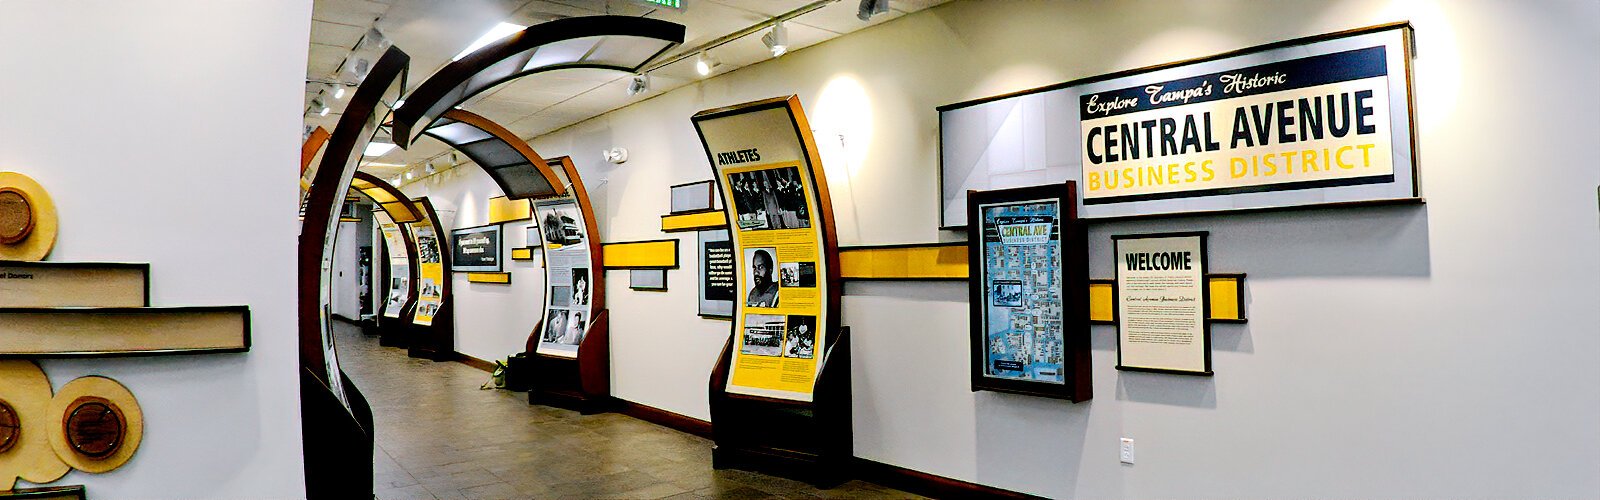 Located in the lobby of the Robert W. Saunders, Sr. Public Library, the Hall of History is a local Black History mini-museum that features interactive displays and exhibits highlighting the historic Central Avenue business district.